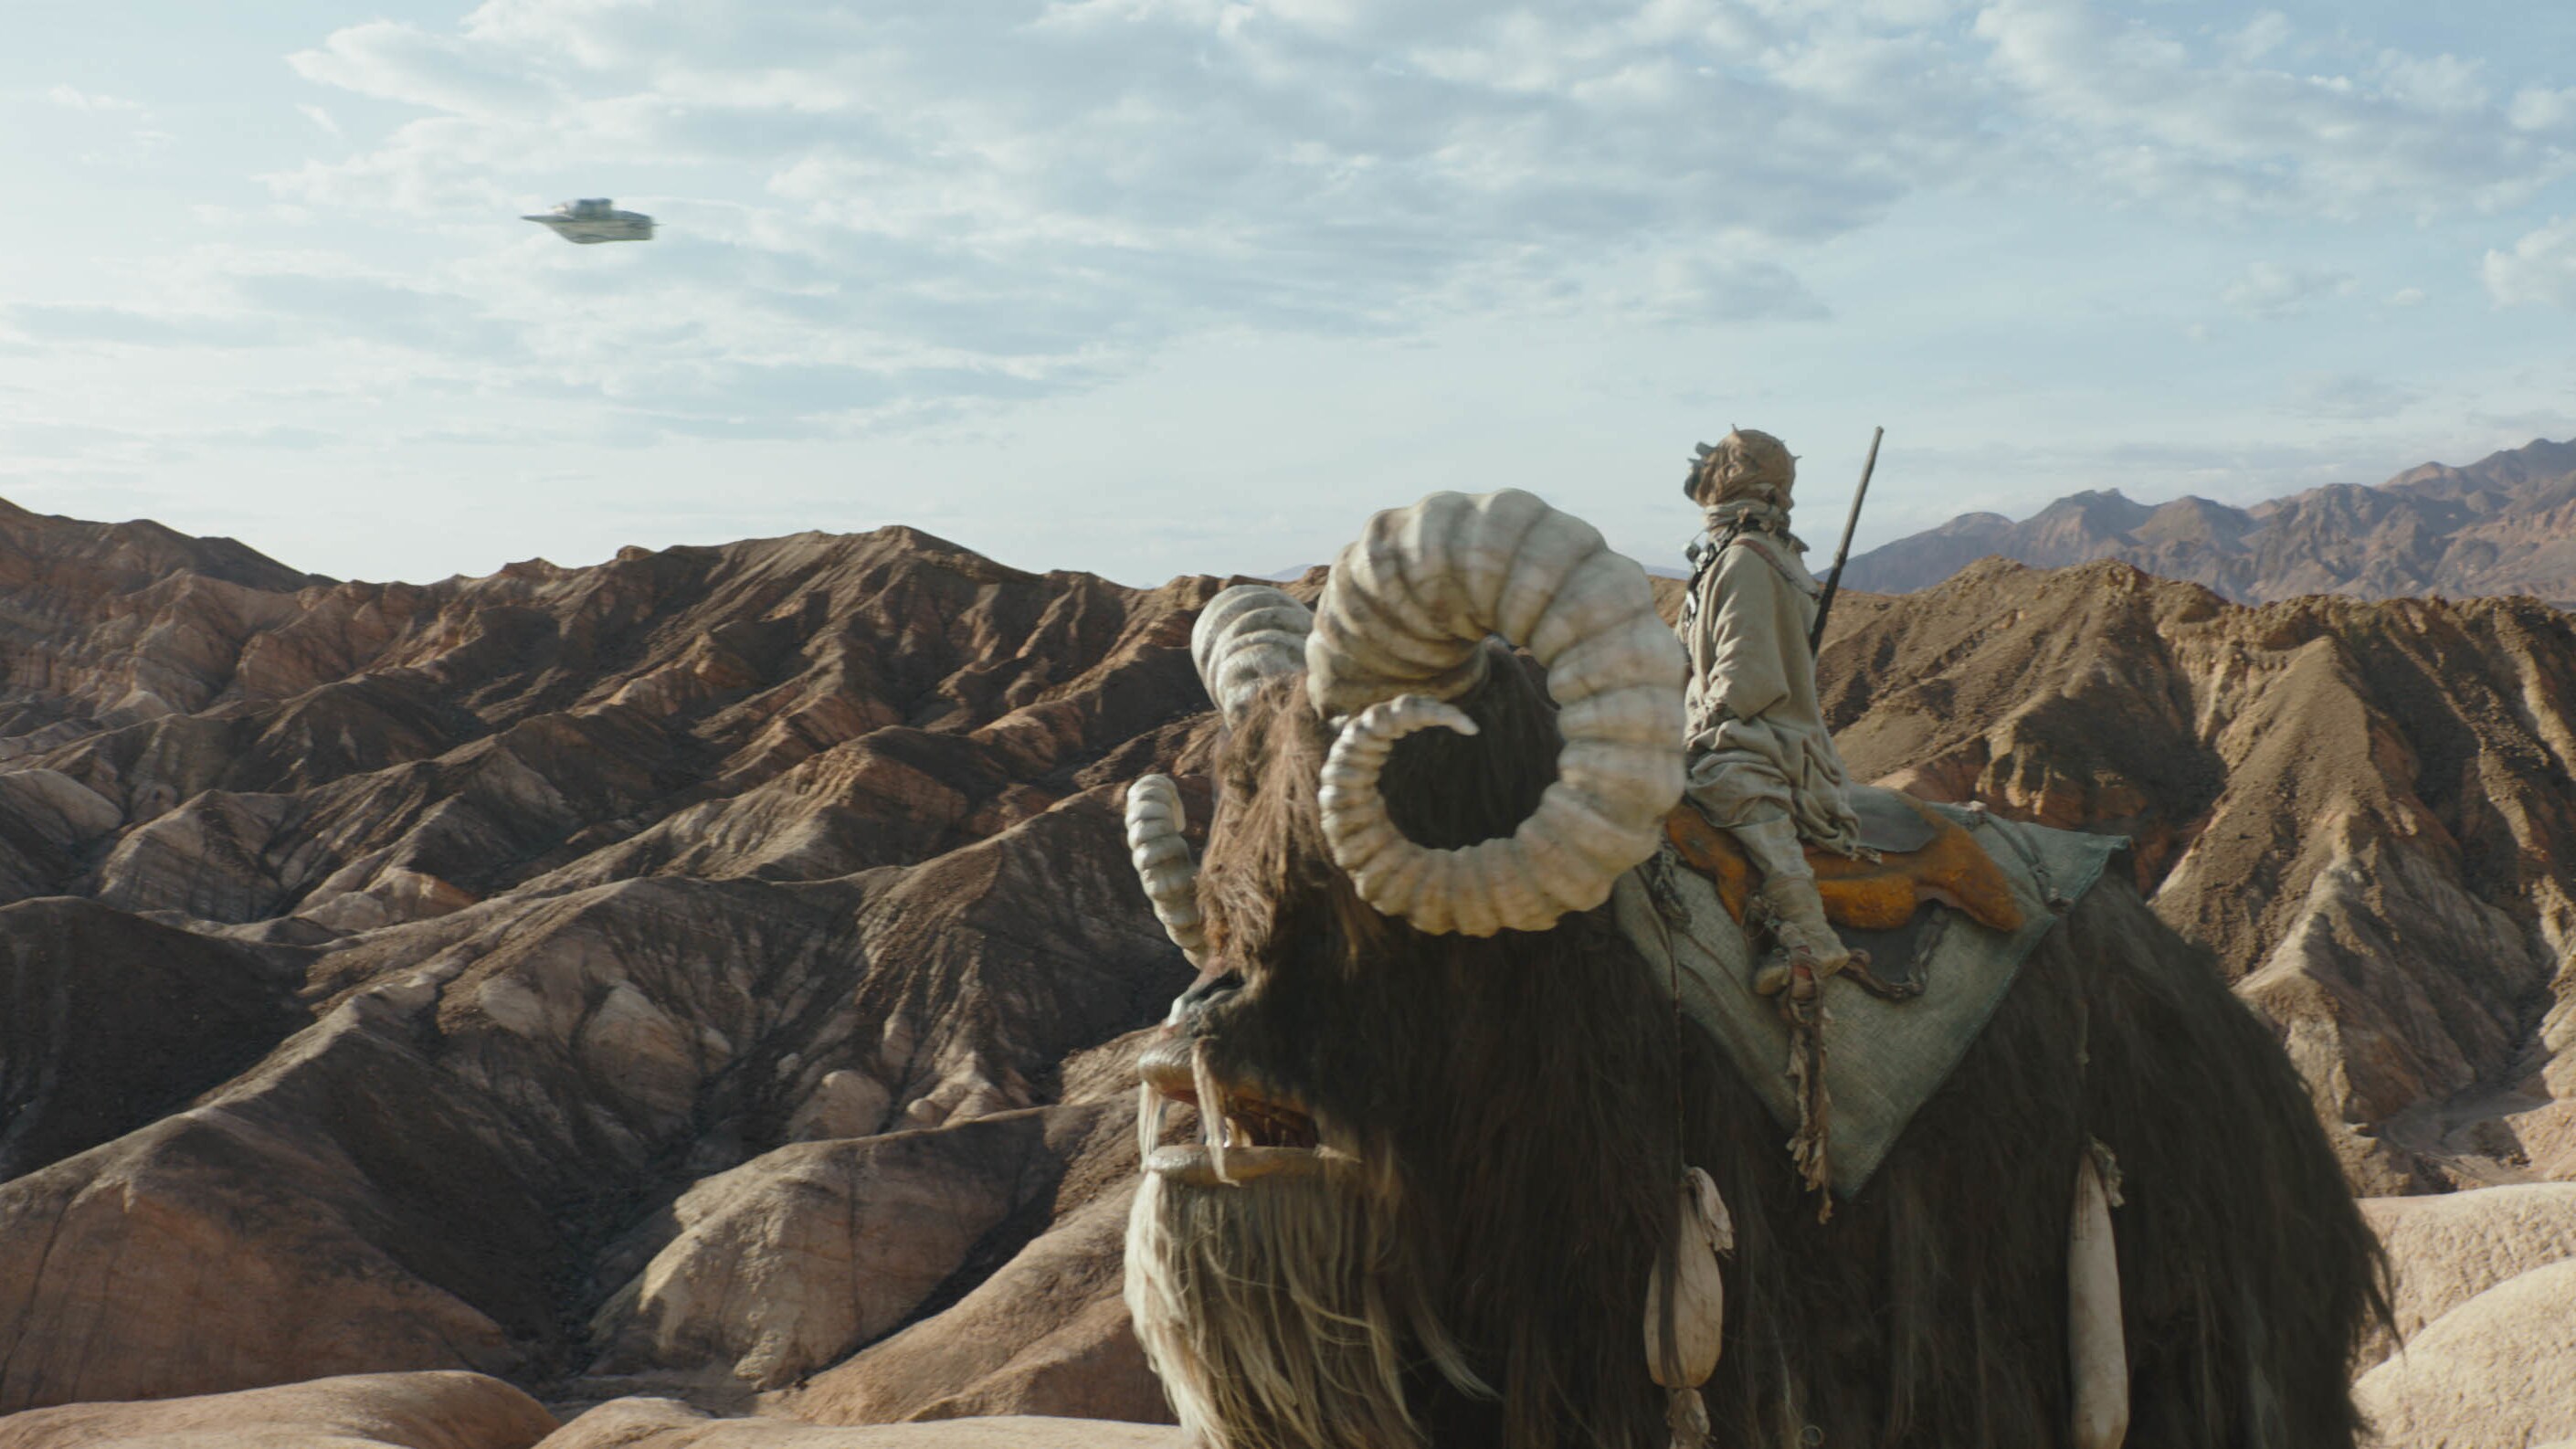 Tusken Raider rides on a bantha below with the Razor Crest in THE MANDALORIAN, season two. © 2020 Lucasfilm Ltd. & TM. All Rights Reserved.